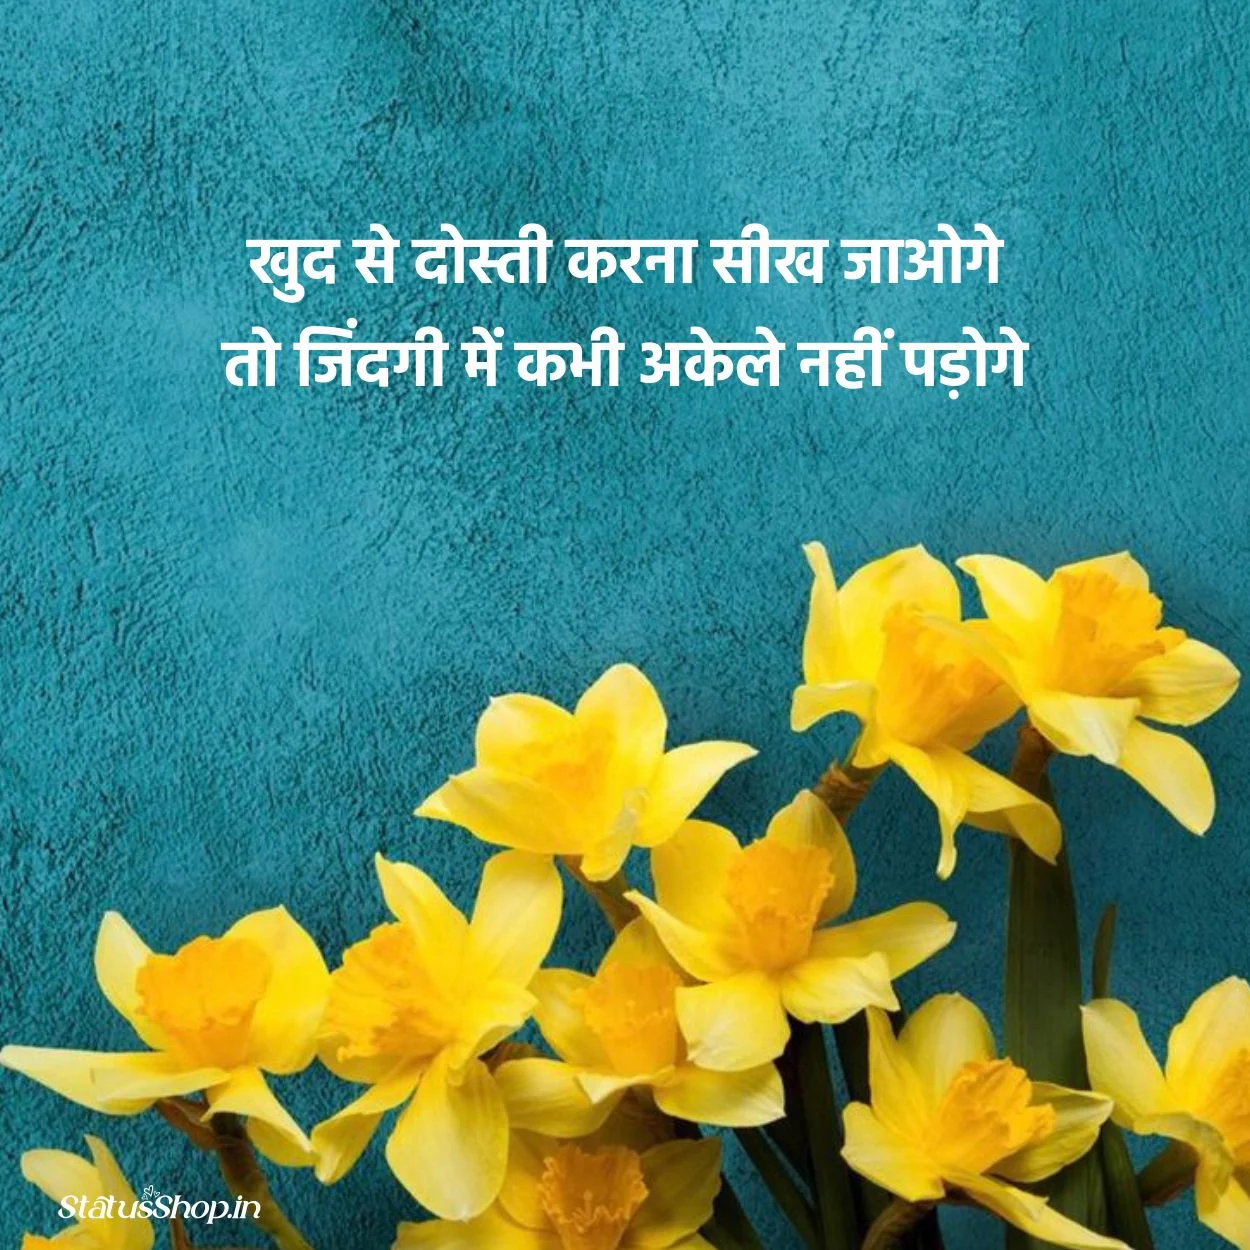 New-Motivational-Quotes-in-Hindi